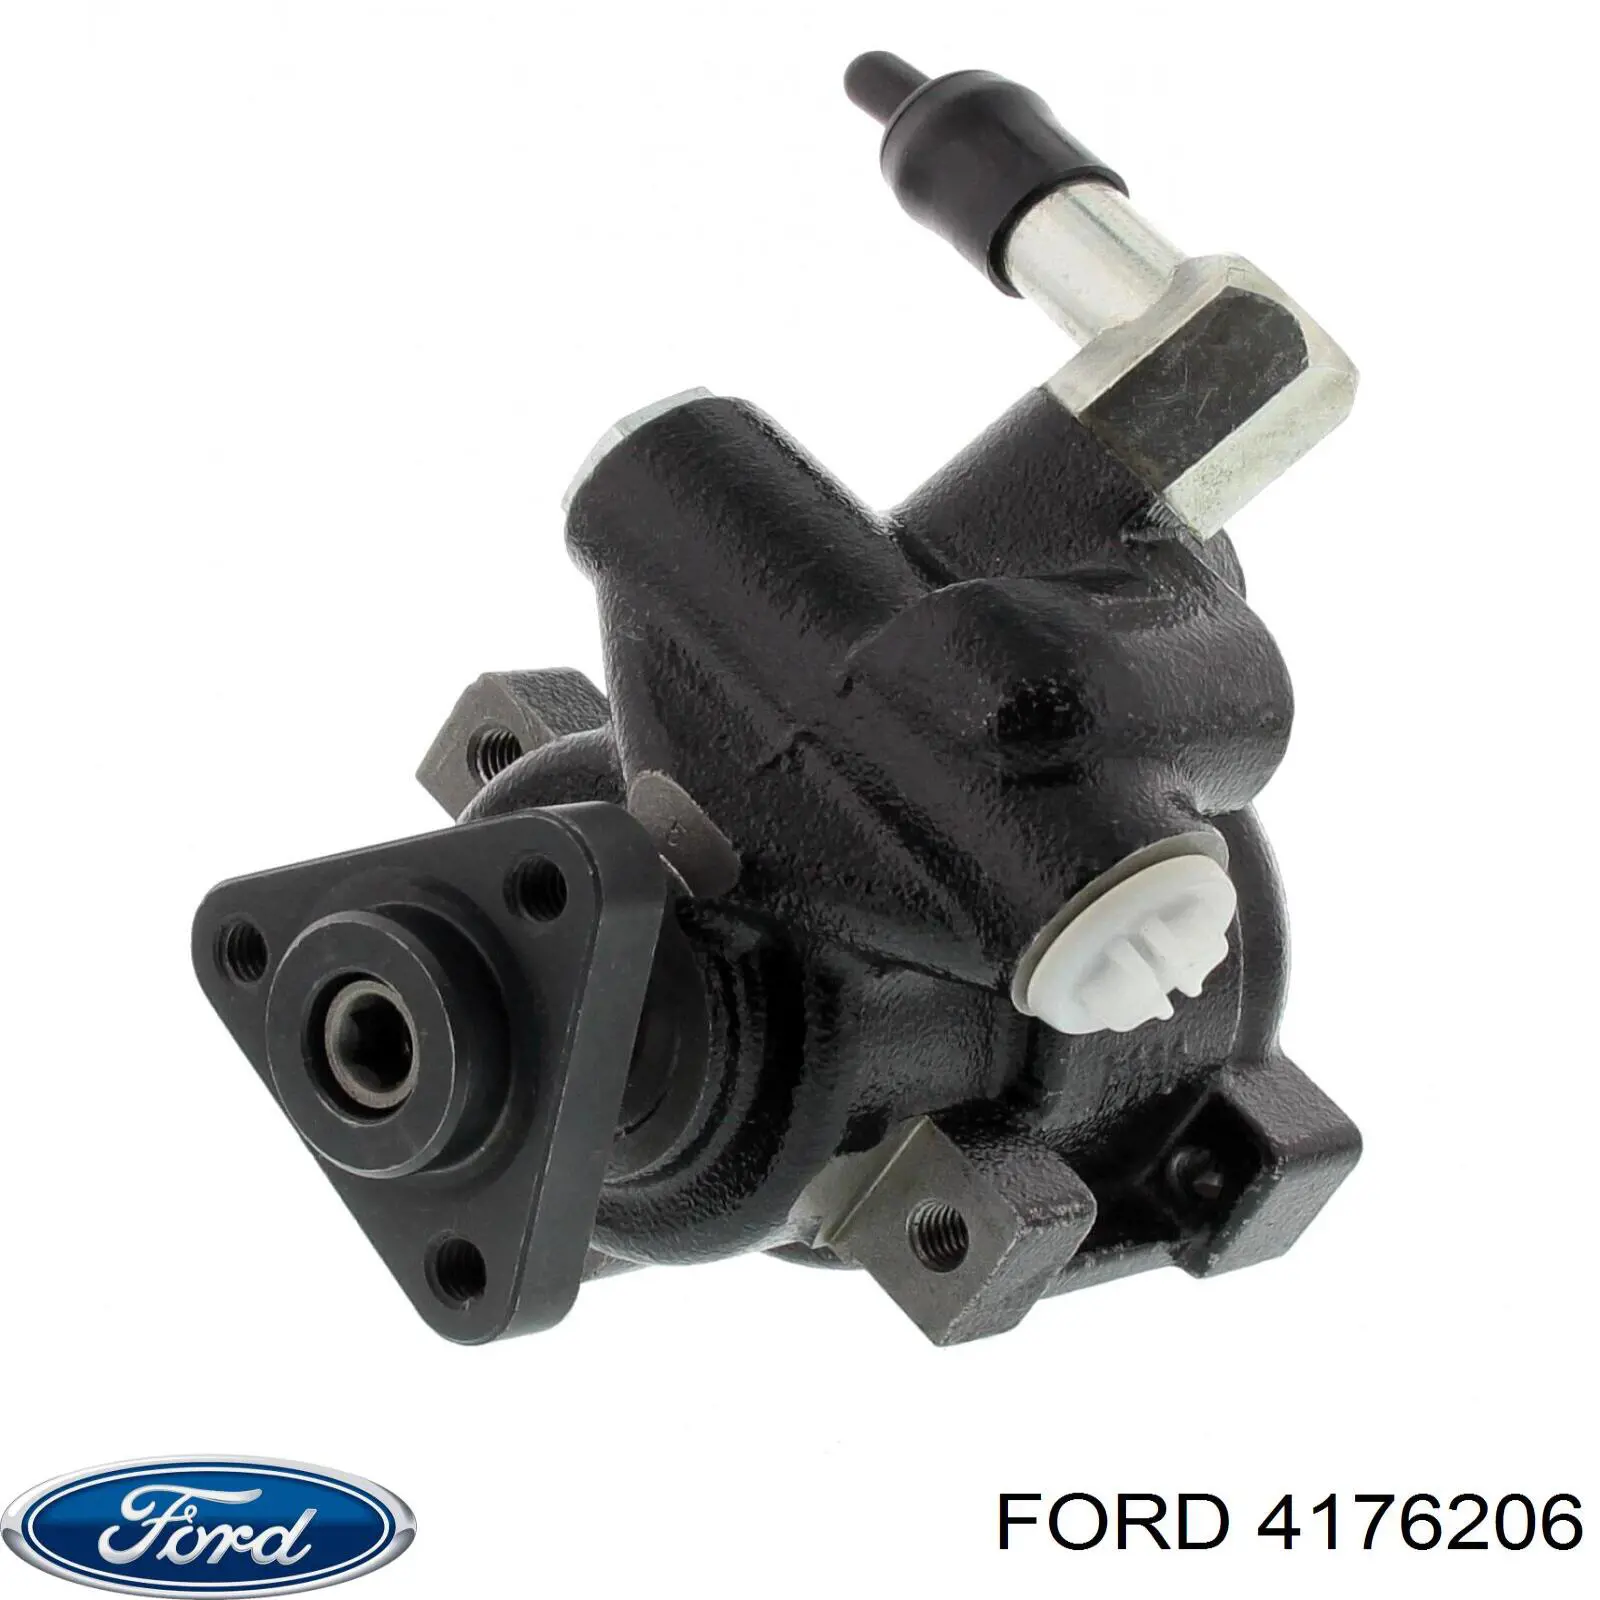 4176206 Ford насос гур